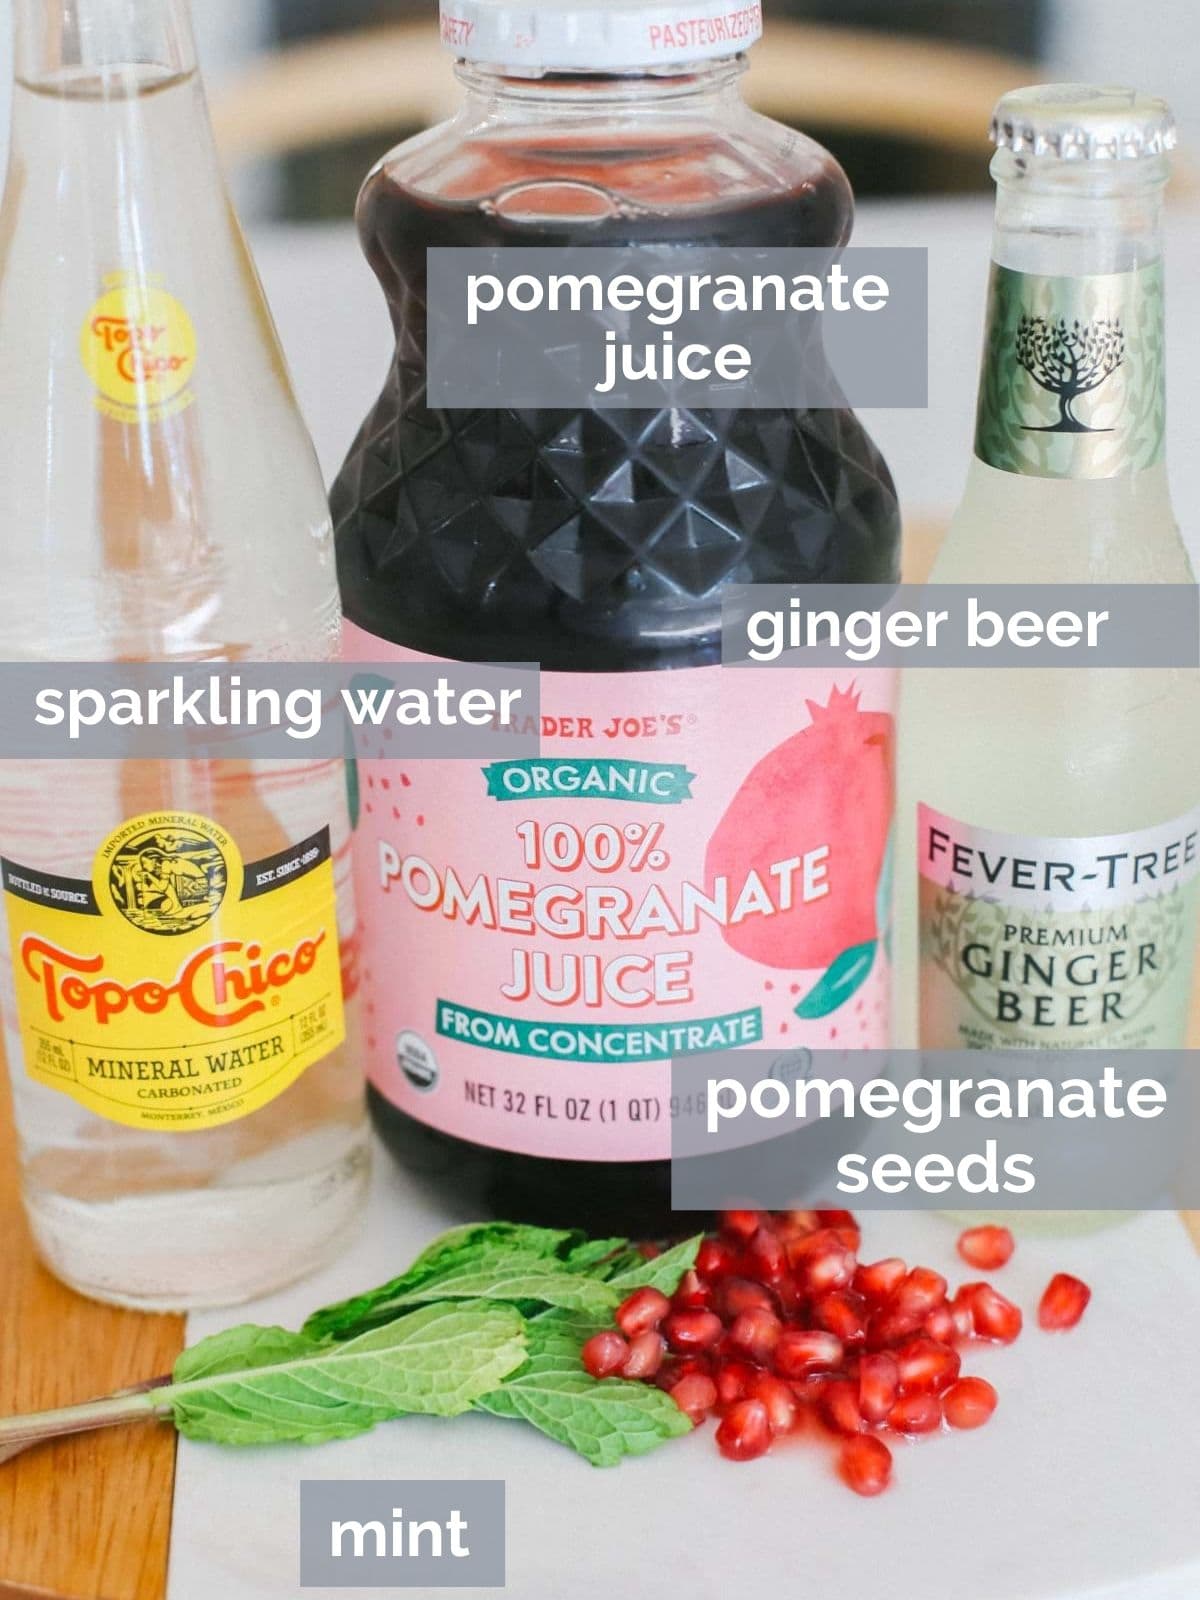 Pomegranate juice, mint, sparkling water, and ginger beer on a table.